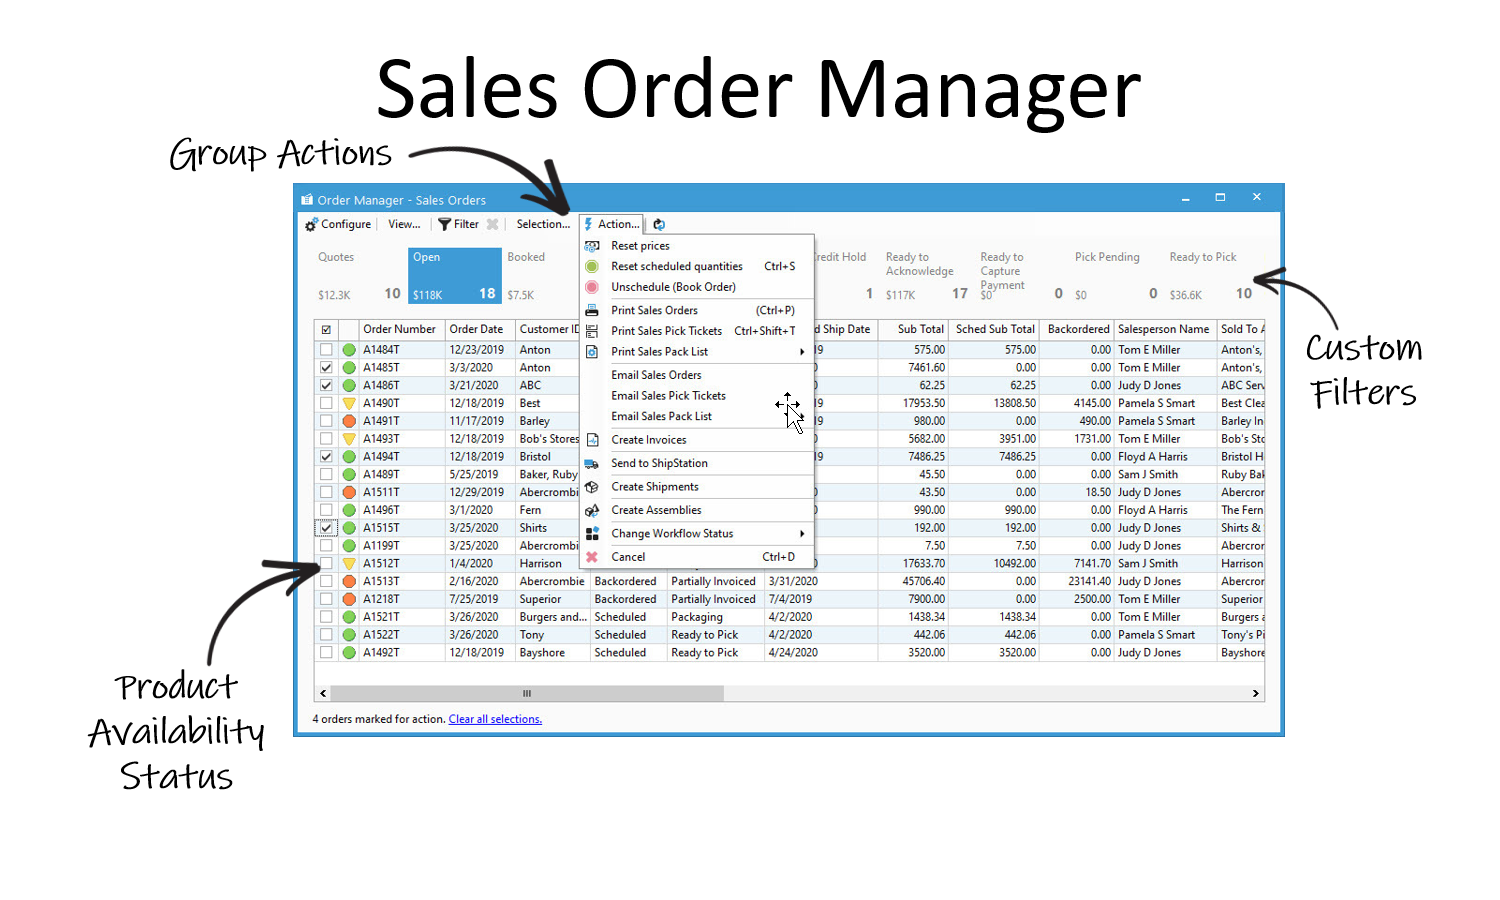 Multi-Channel Sales Order Manager